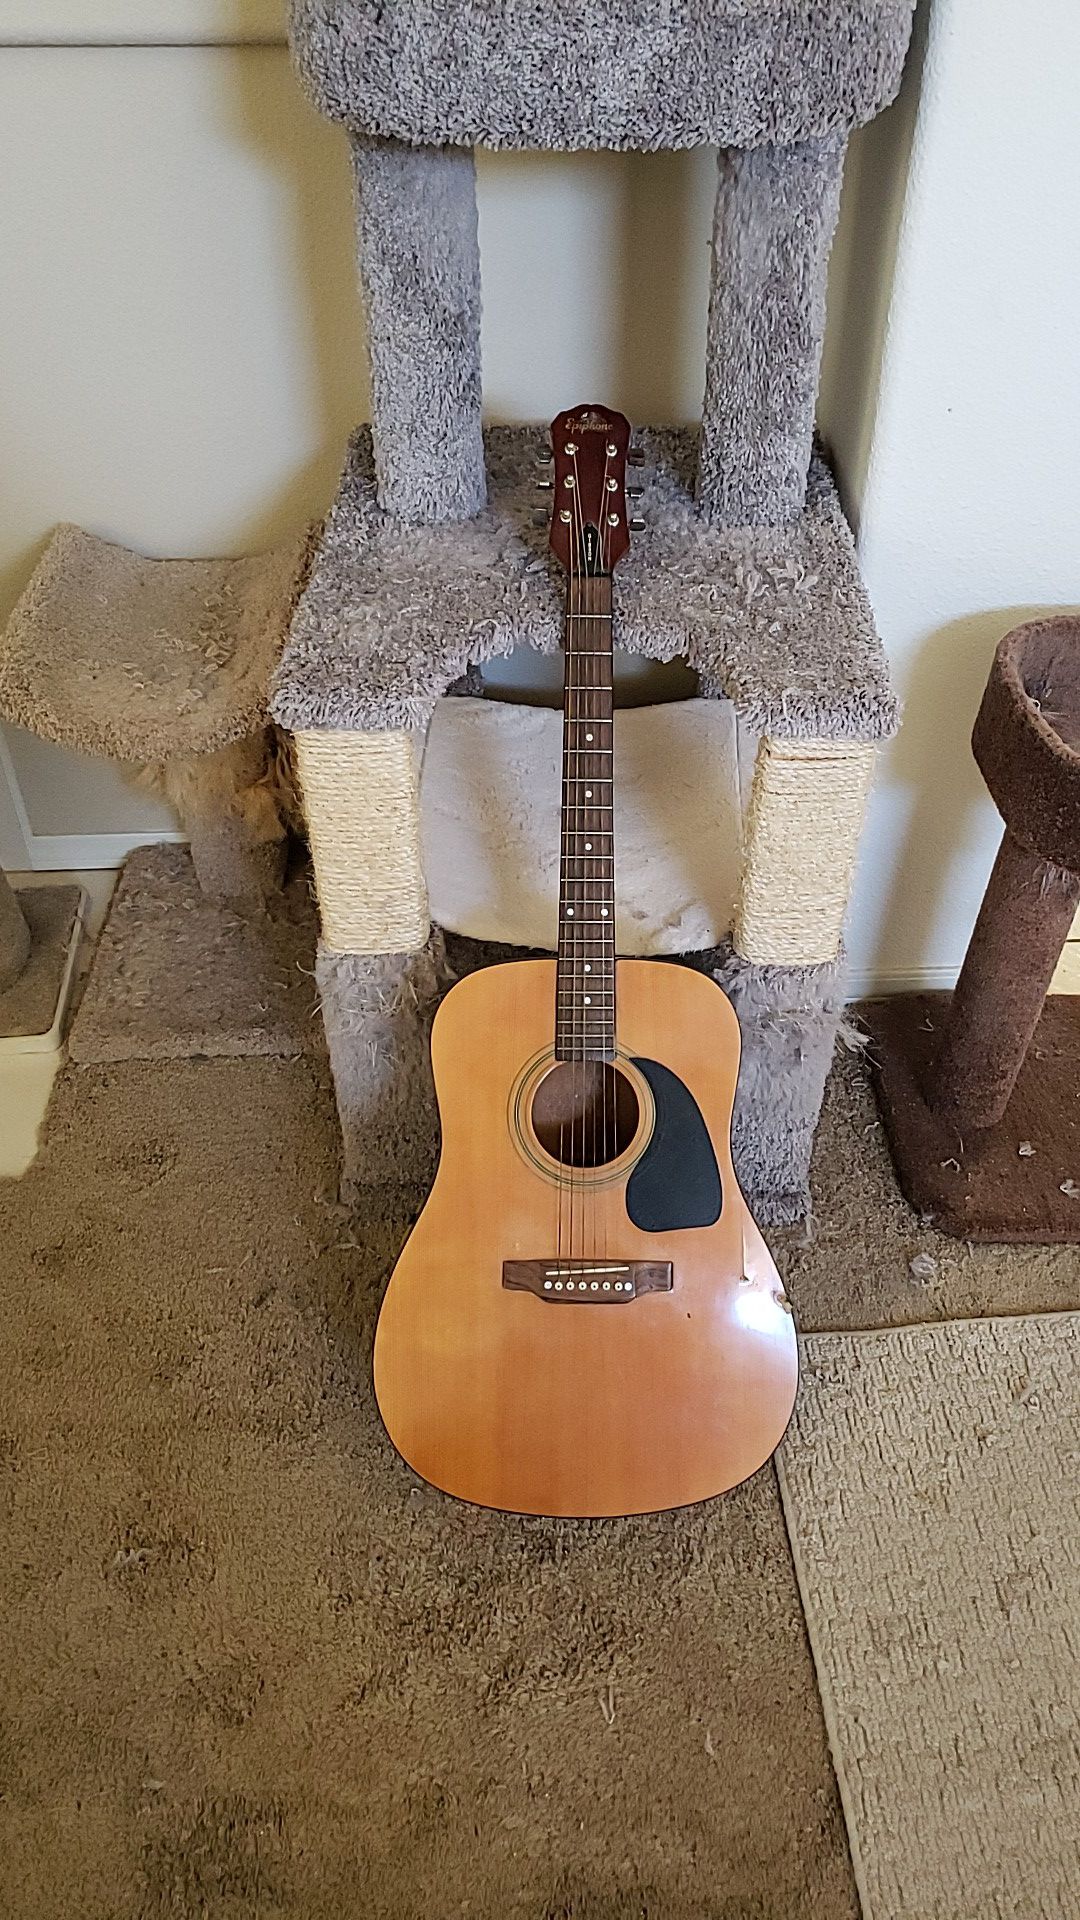 Gibson Epiphone acoustic guitar